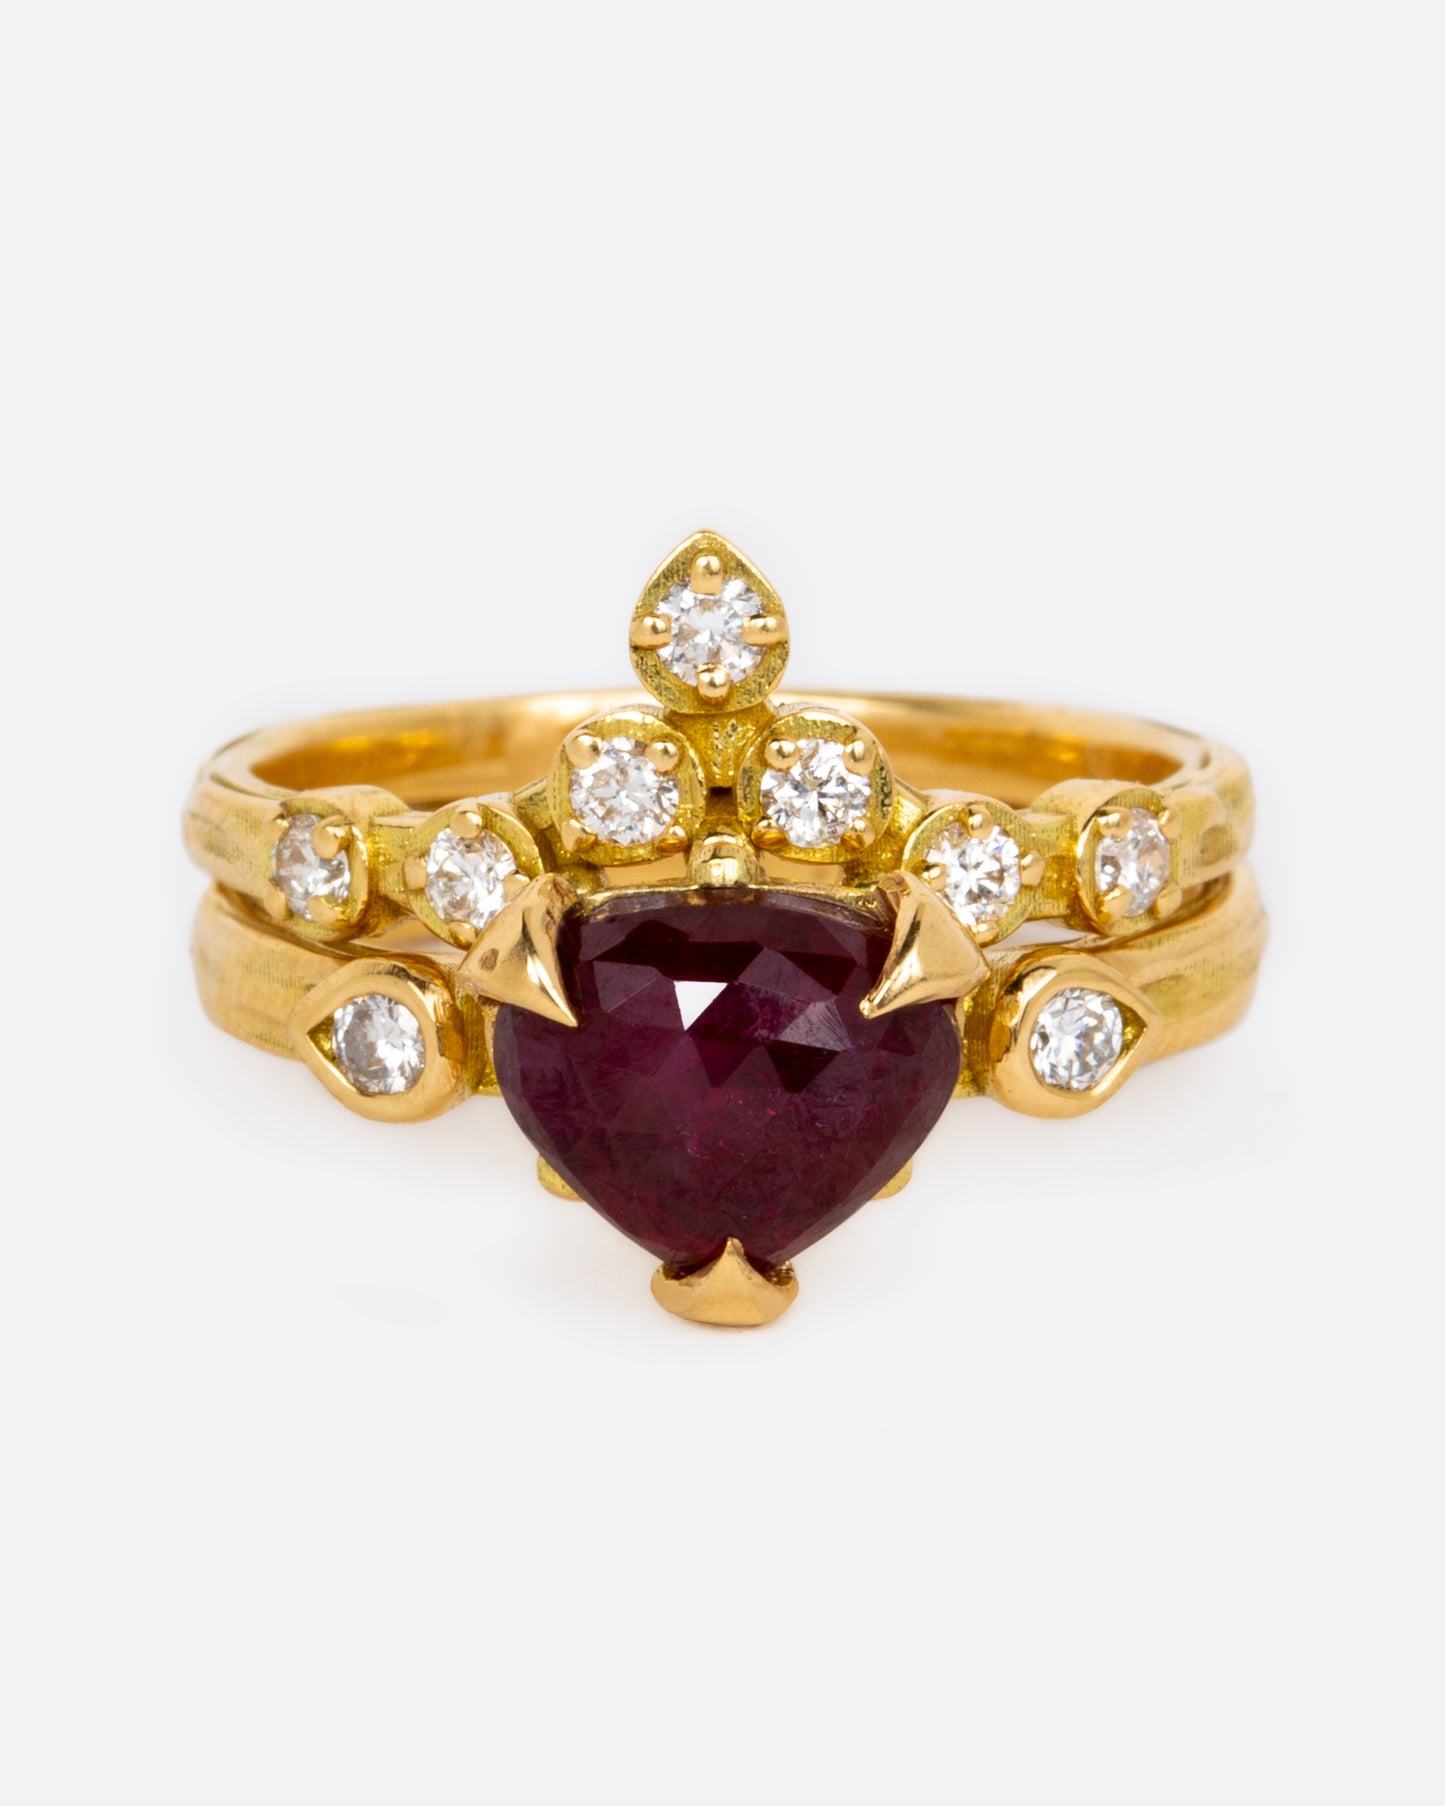 A deep red, rose cut ruby heart flanked by two white diamonds.